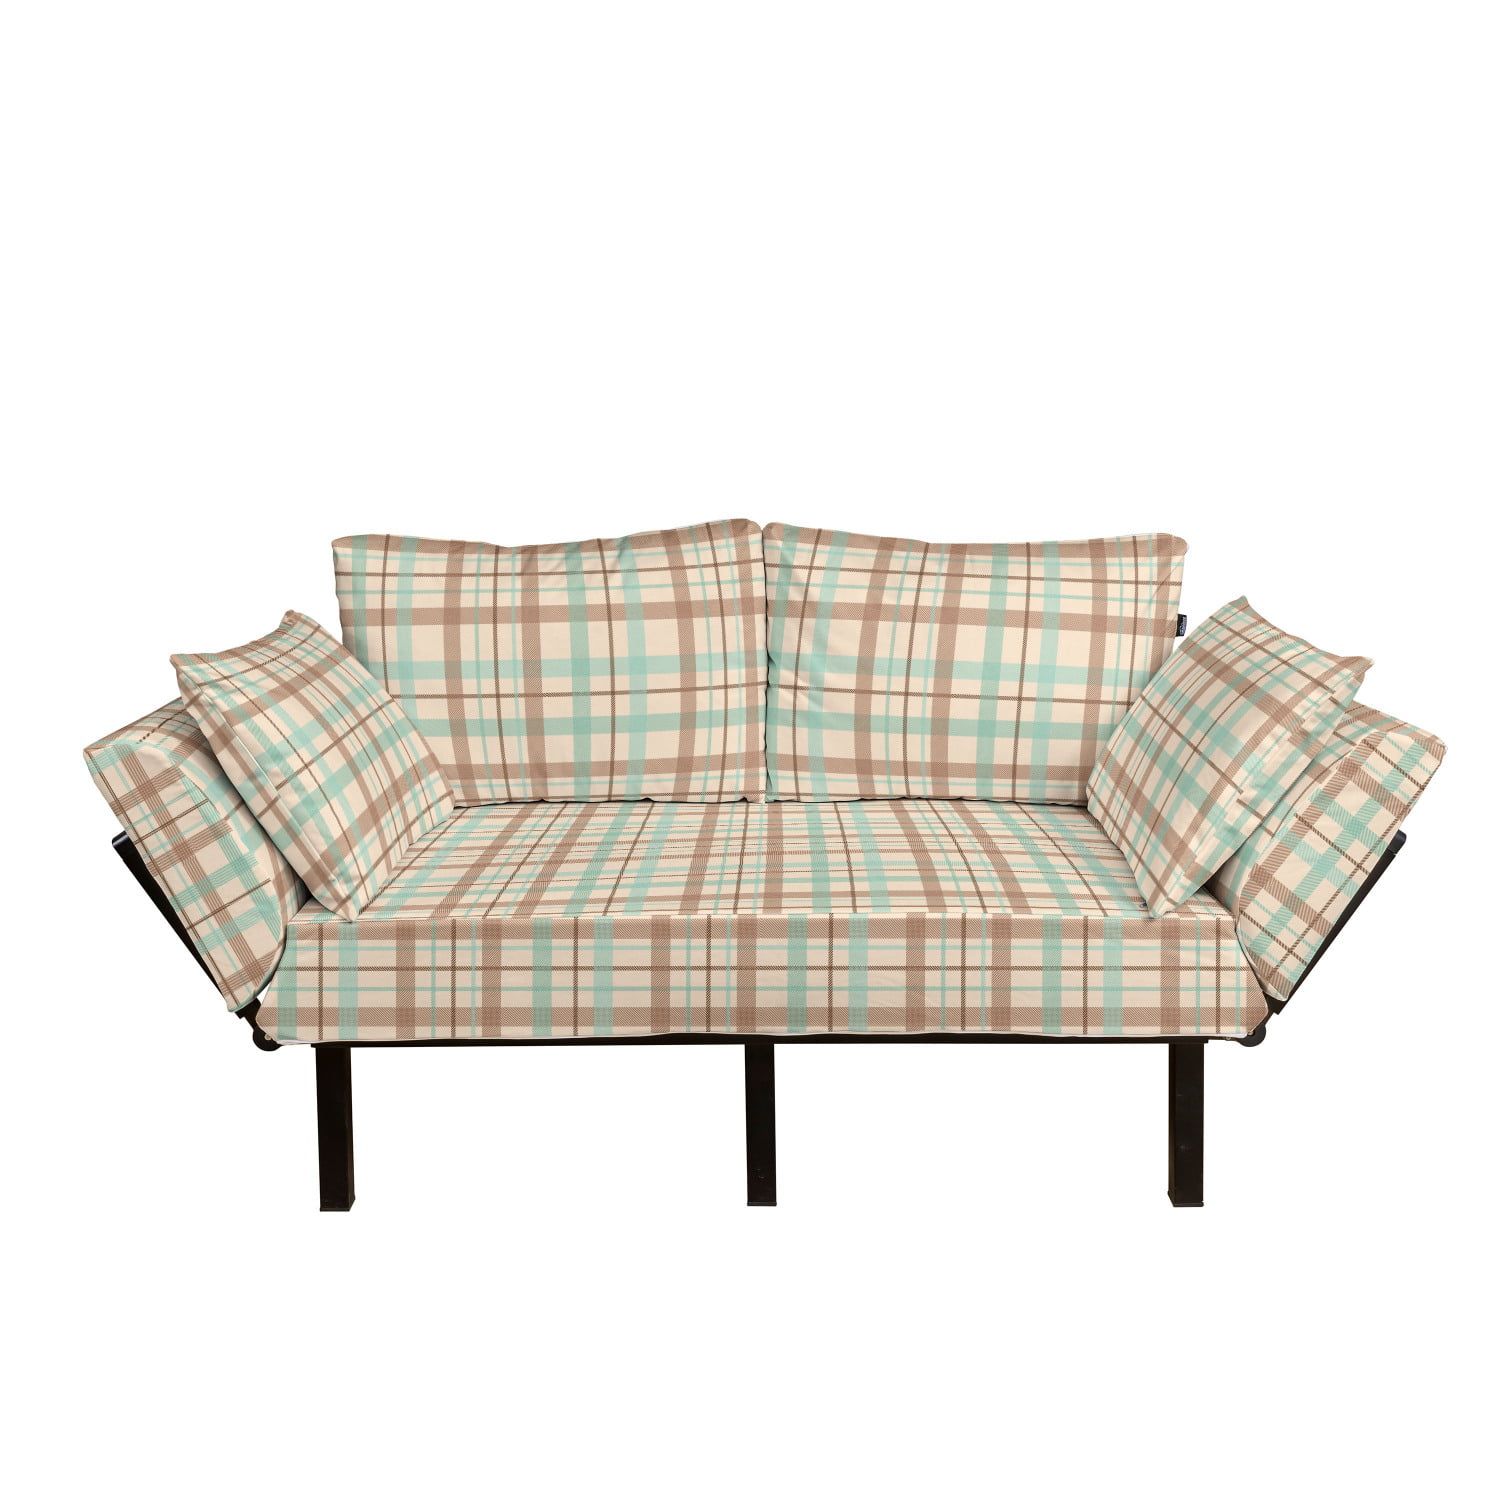 Gingham Pattern with Bicolor Checkered Squares with Heart Shaped Motifs Loveseat Daybed with Metal Frame Upholstered Sofa for Living Dorm Ambesonne Vintage Futon Couch Mustard and White